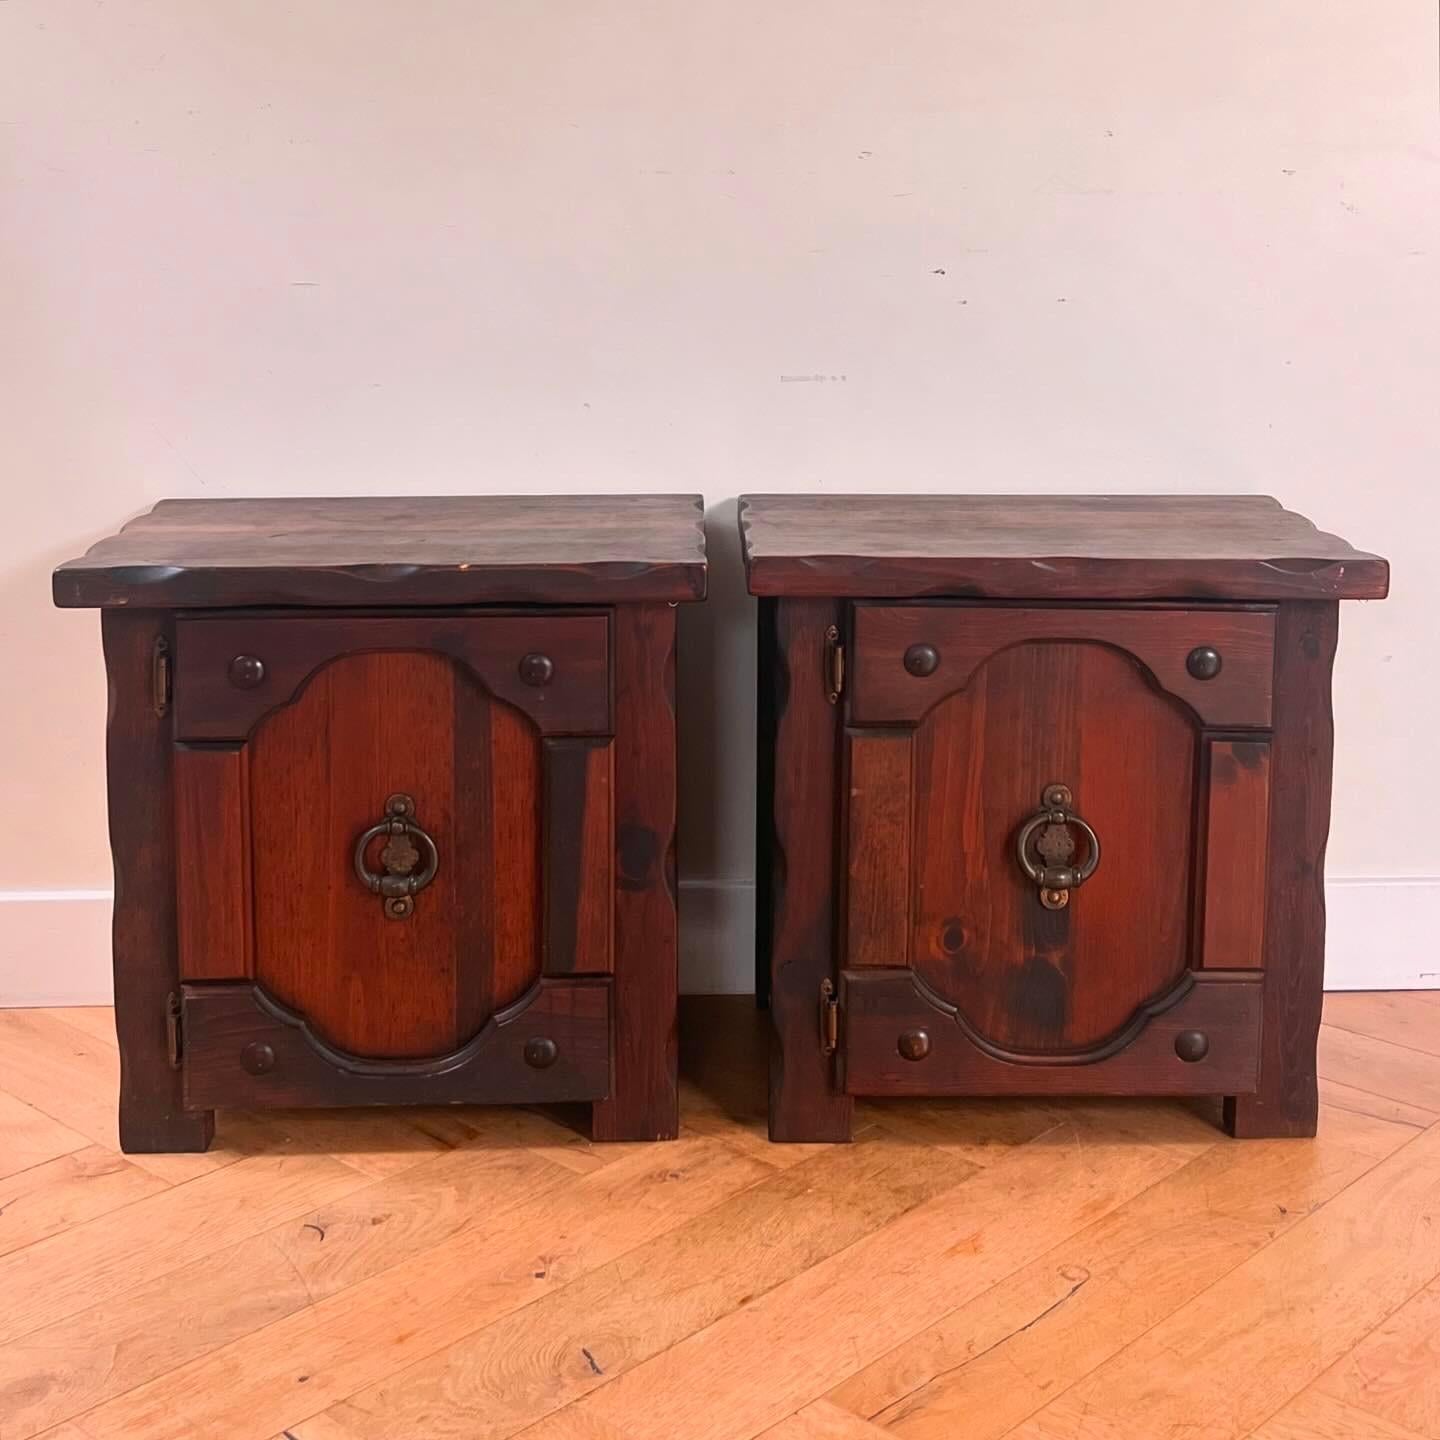 Mission craftsman gothic wooden nightstands with iron hardware, circa 1970 For Sale 11